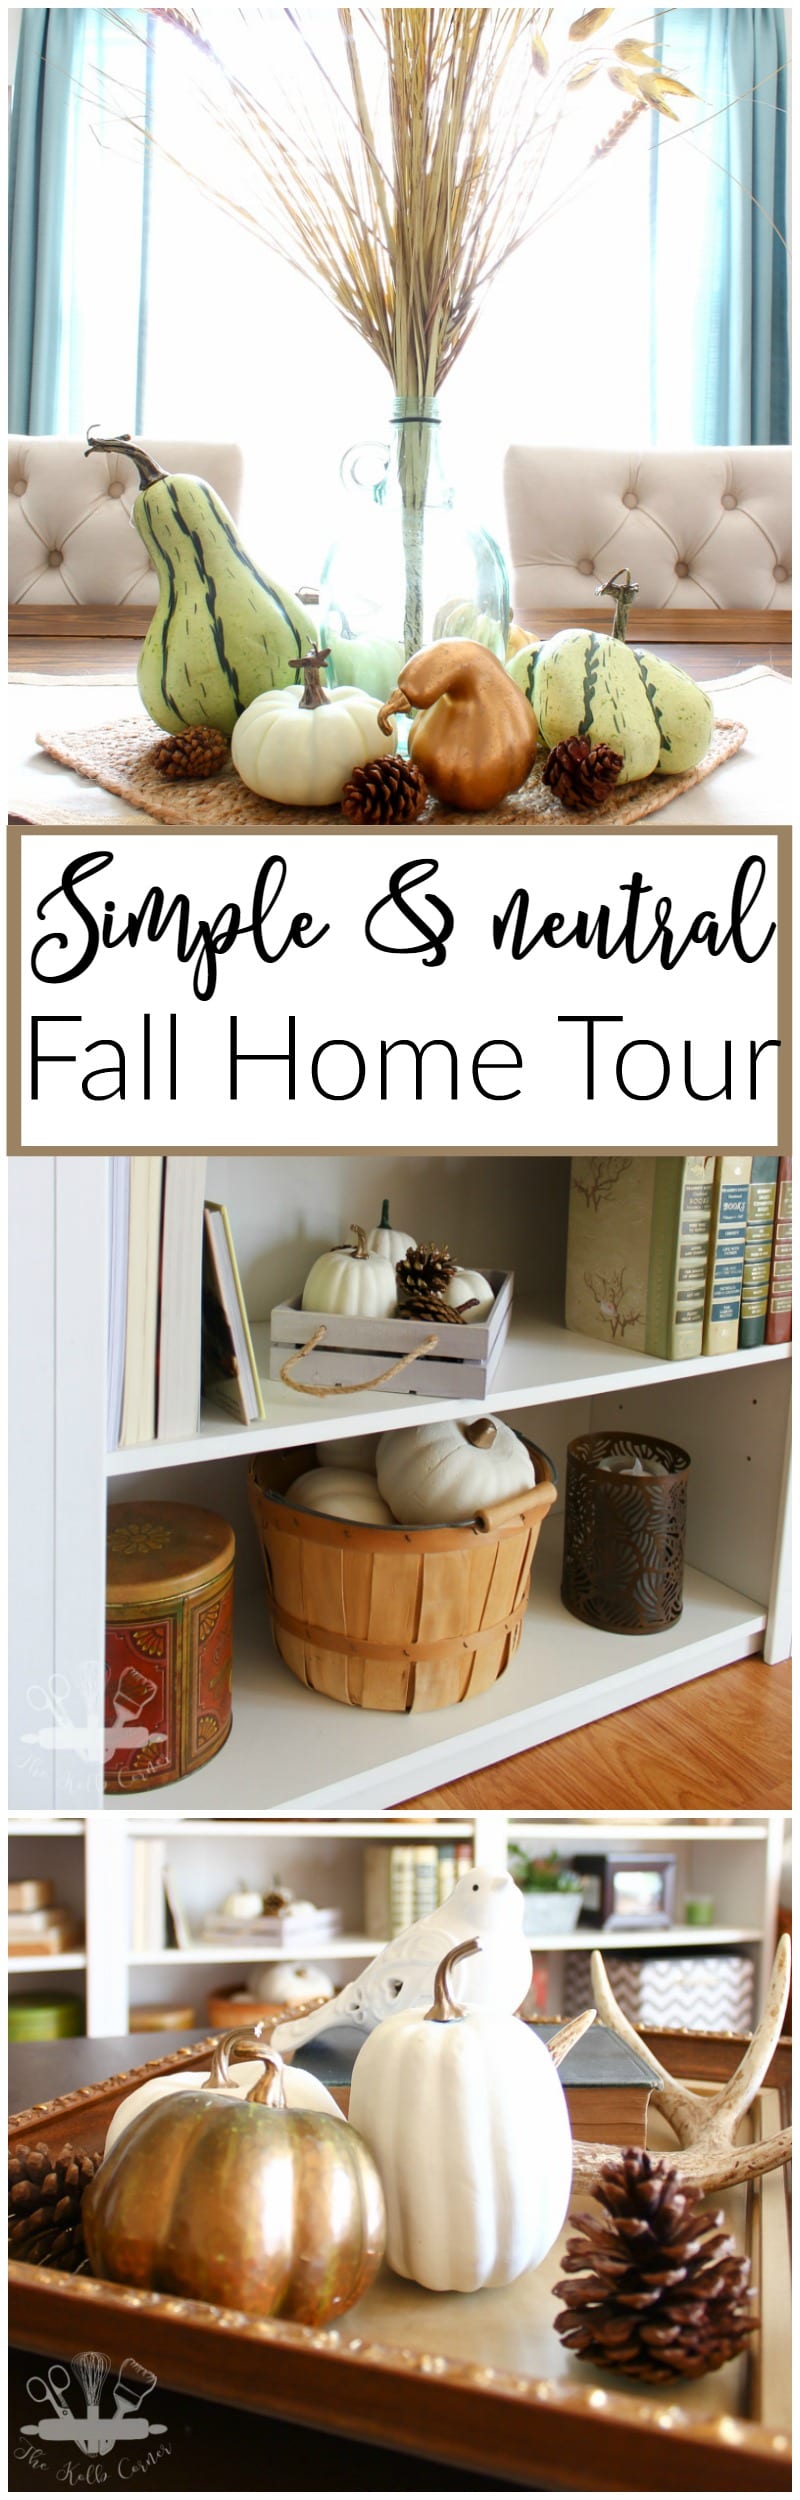 Simple and Neutral Fall Home Tour